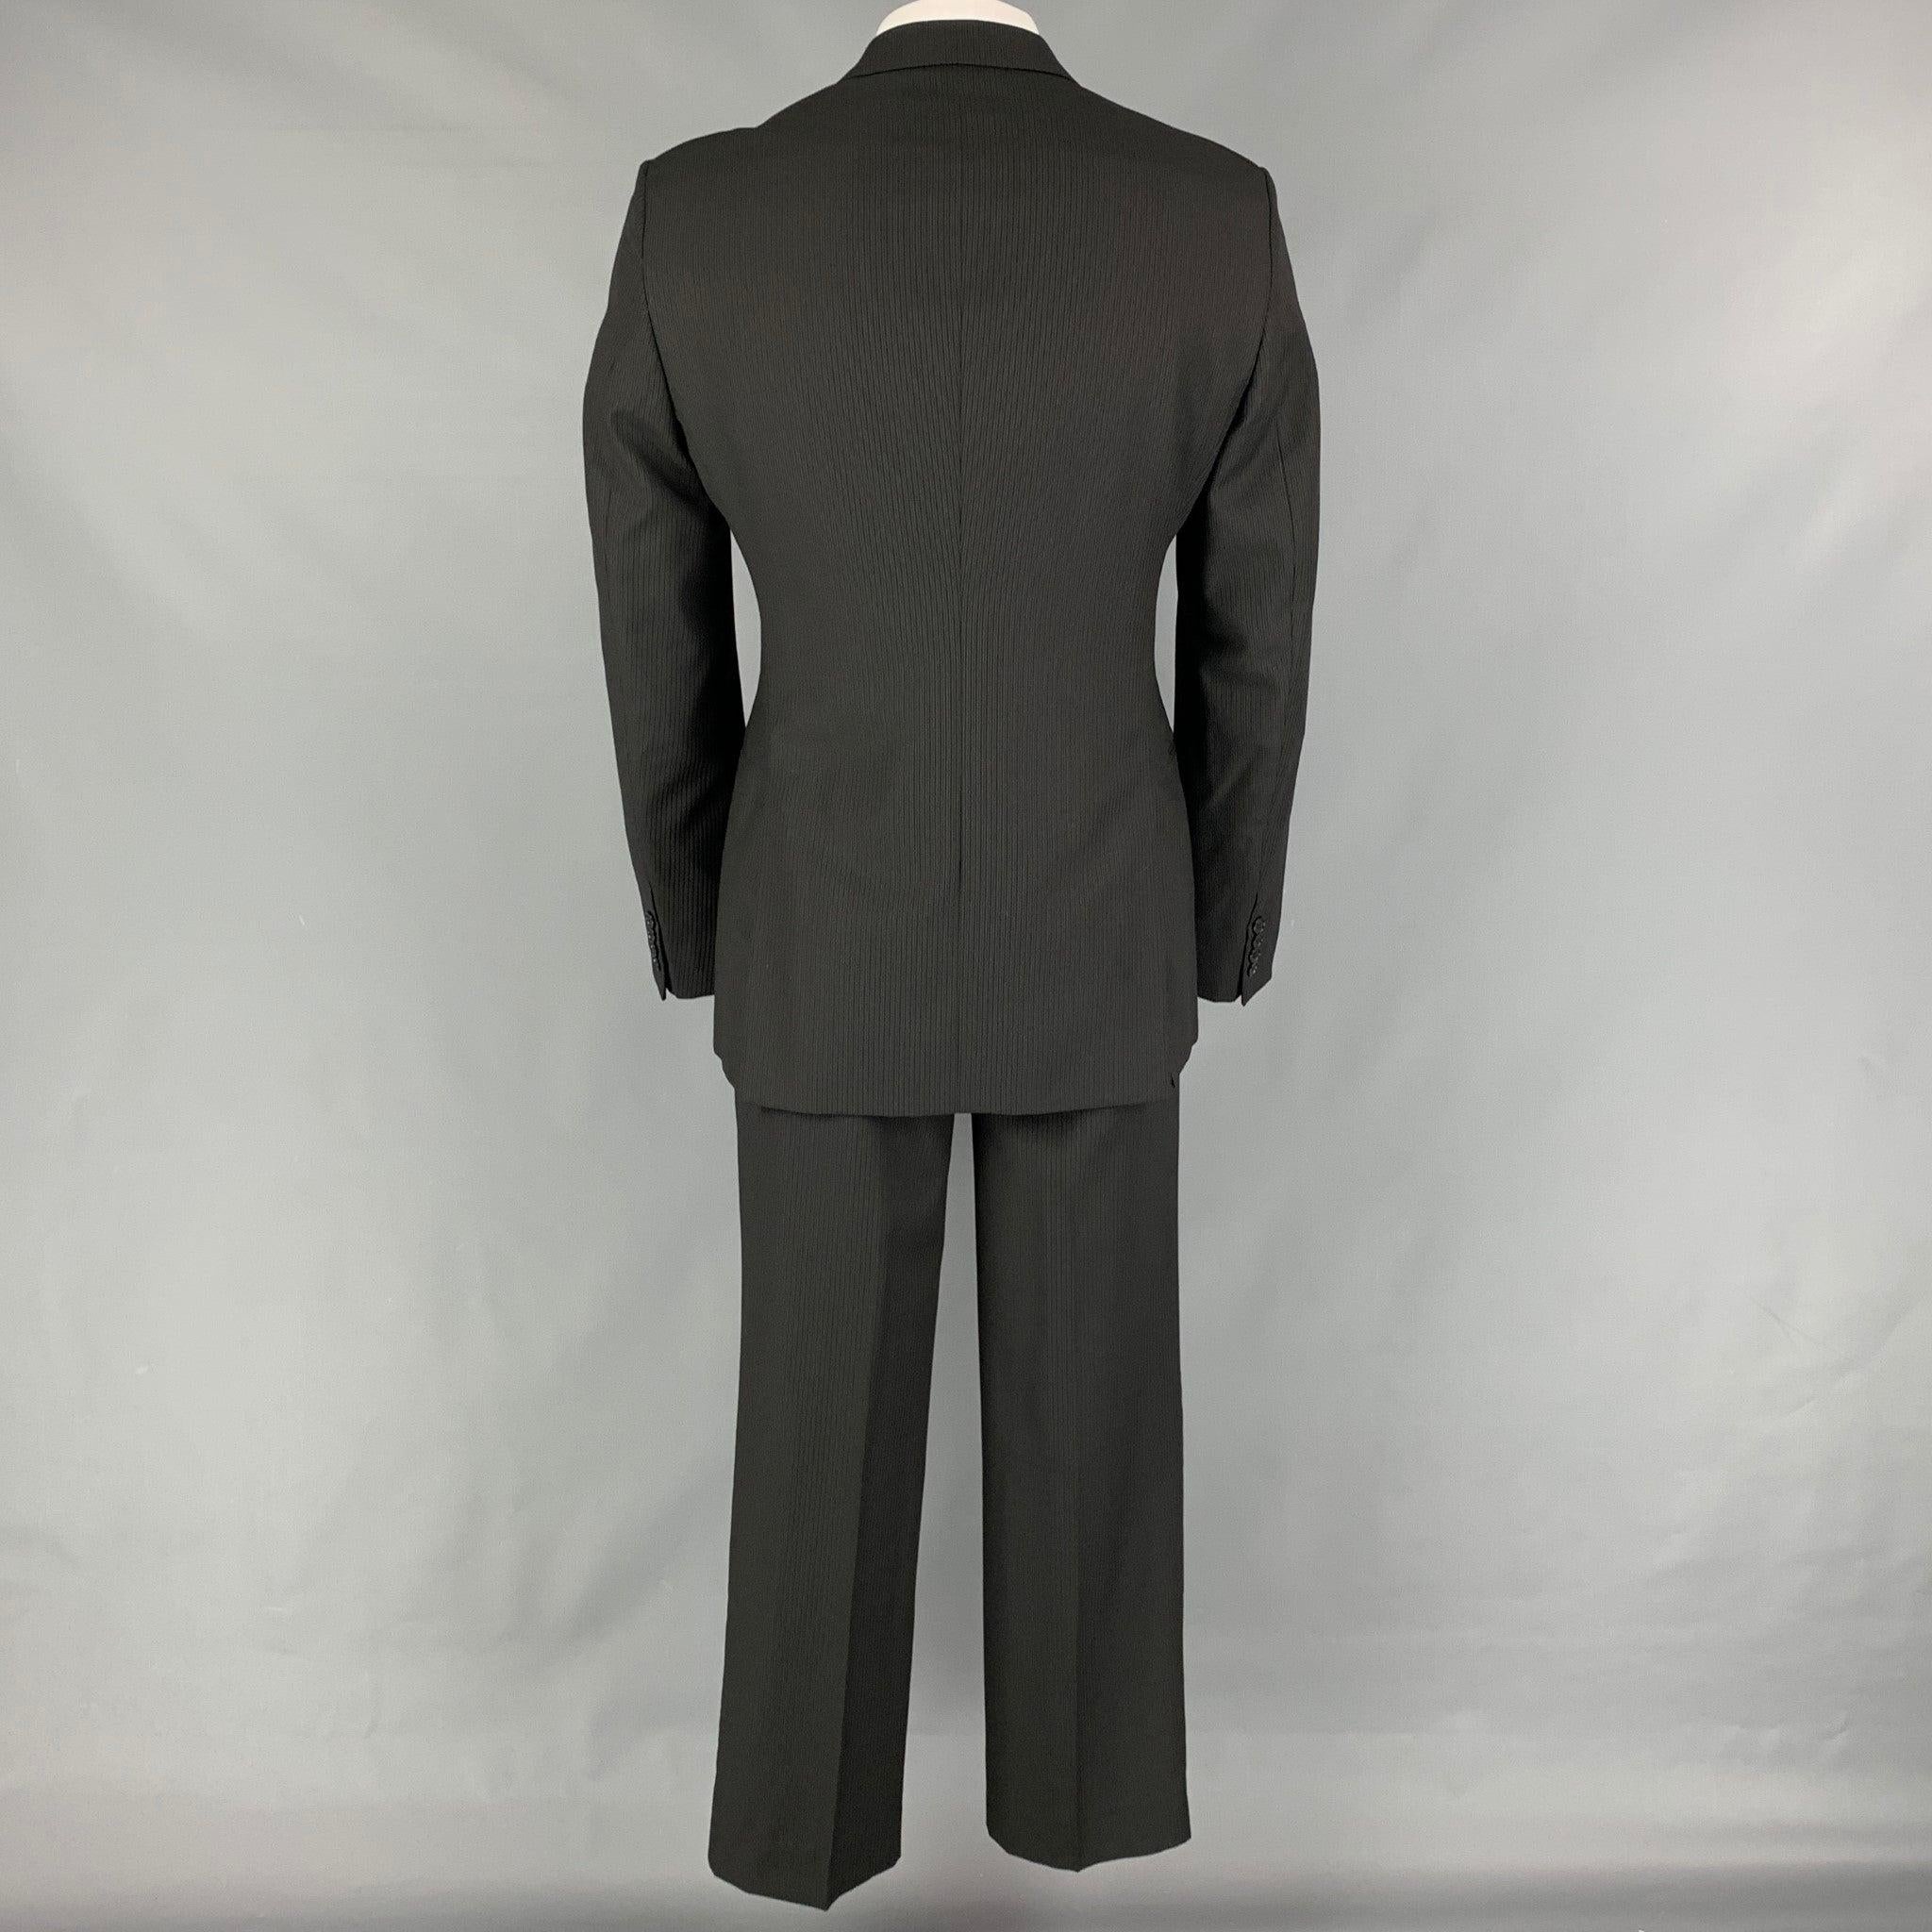 ARMANI COLLEZIONI Size 42 Long Black Pinstripe Wool Notch Lapel Suit In Good Condition For Sale In San Francisco, CA